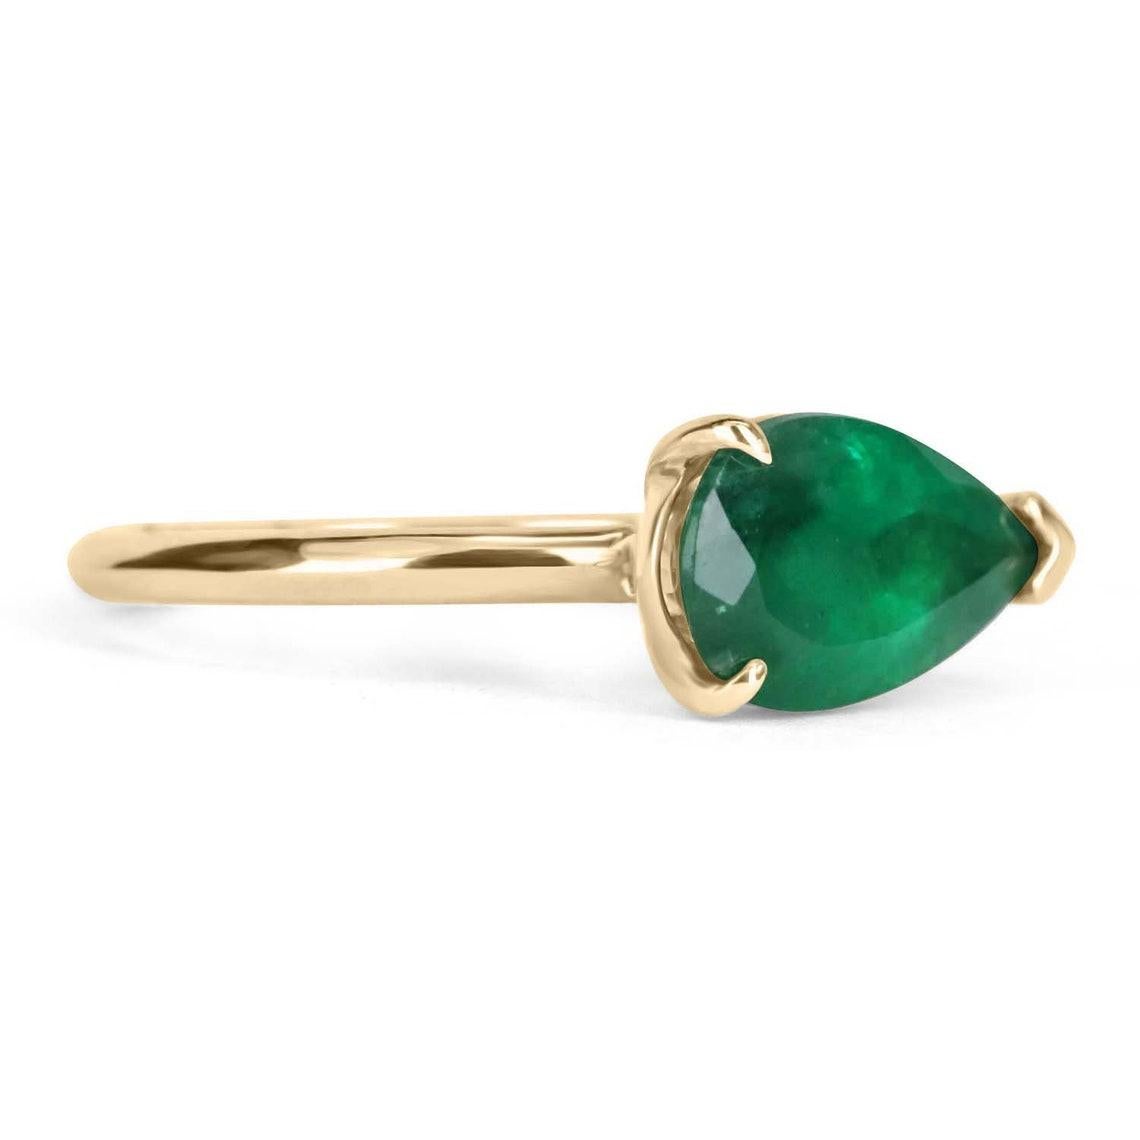 This ring is not for the faint of heart! Displayed is a rich dark green earth mined emerald, teardrop solitaire ring set east to west in 14K gold. This gorgeous solitaire ring carries a full 2.0-carat emerald that has incredible flaws that will have